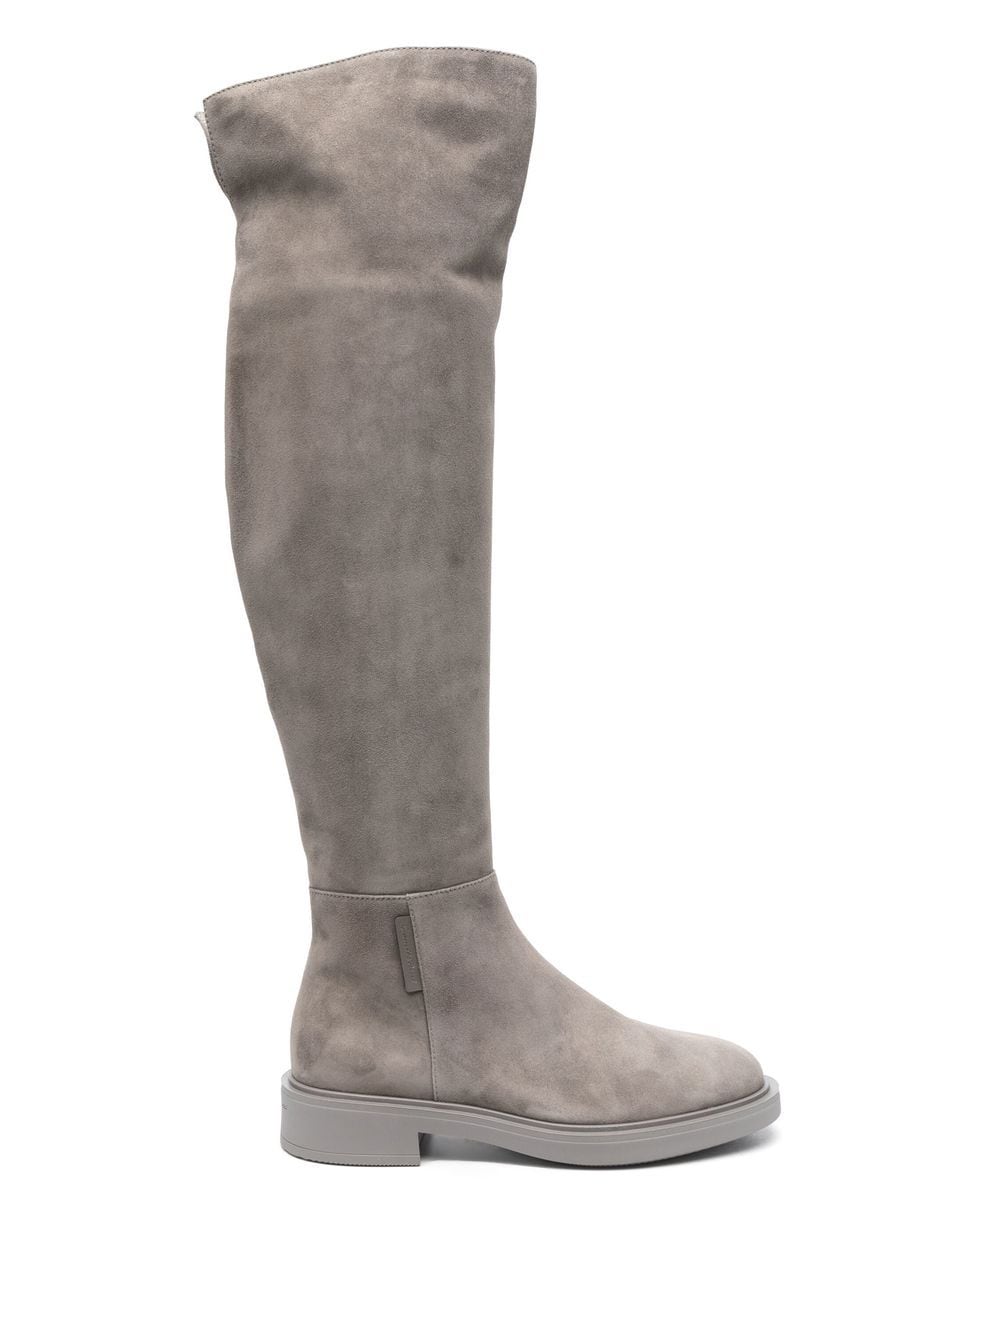 Lexington over-the-knee suede boots